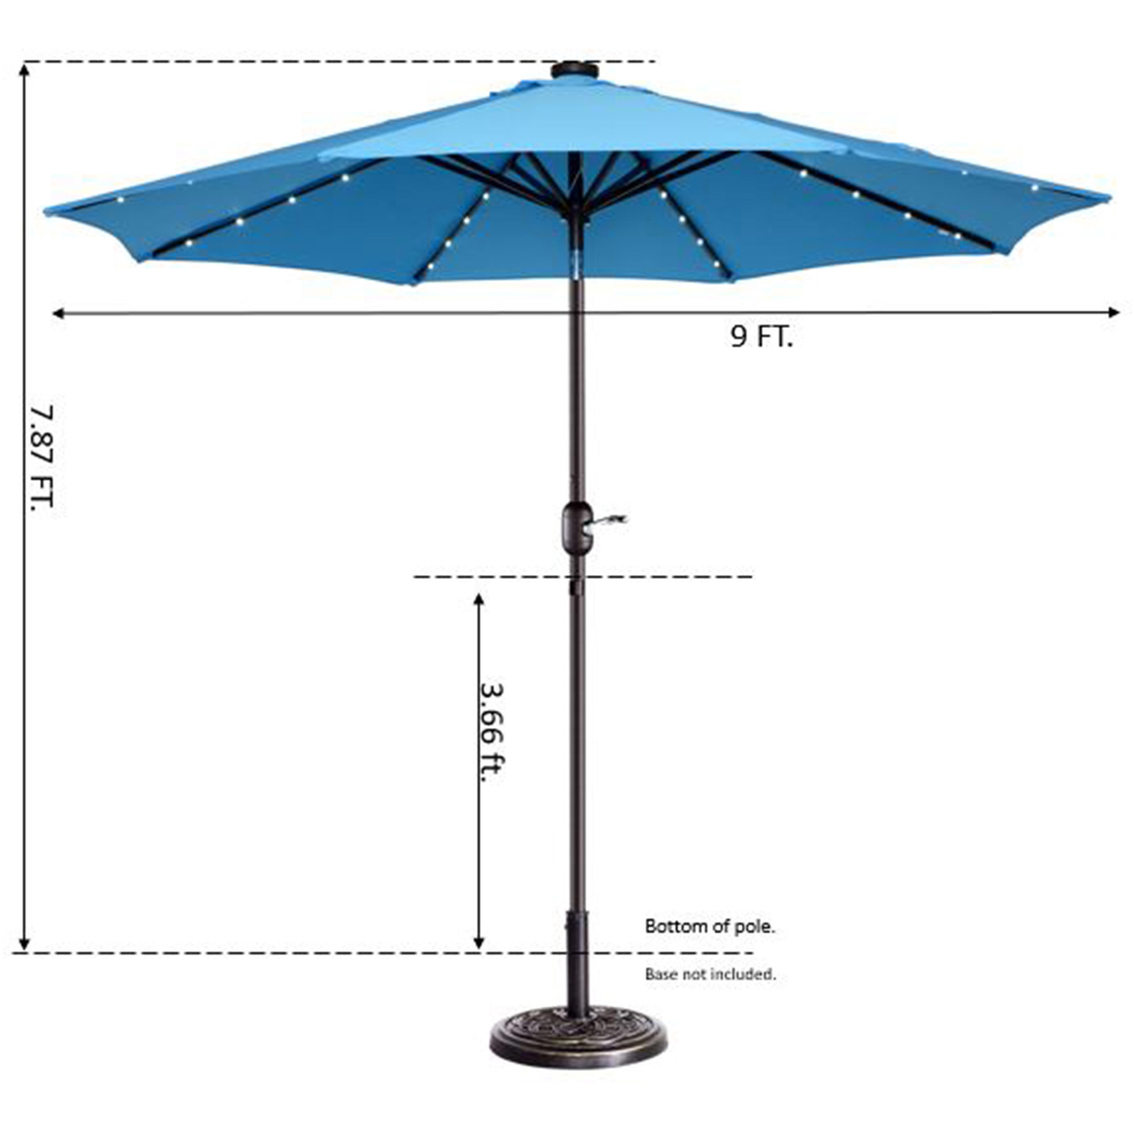 Pure Garden 9 ft. Solar Powered LED Lighted Patio Umbrella with Push Button Tilt - Image 2 of 8